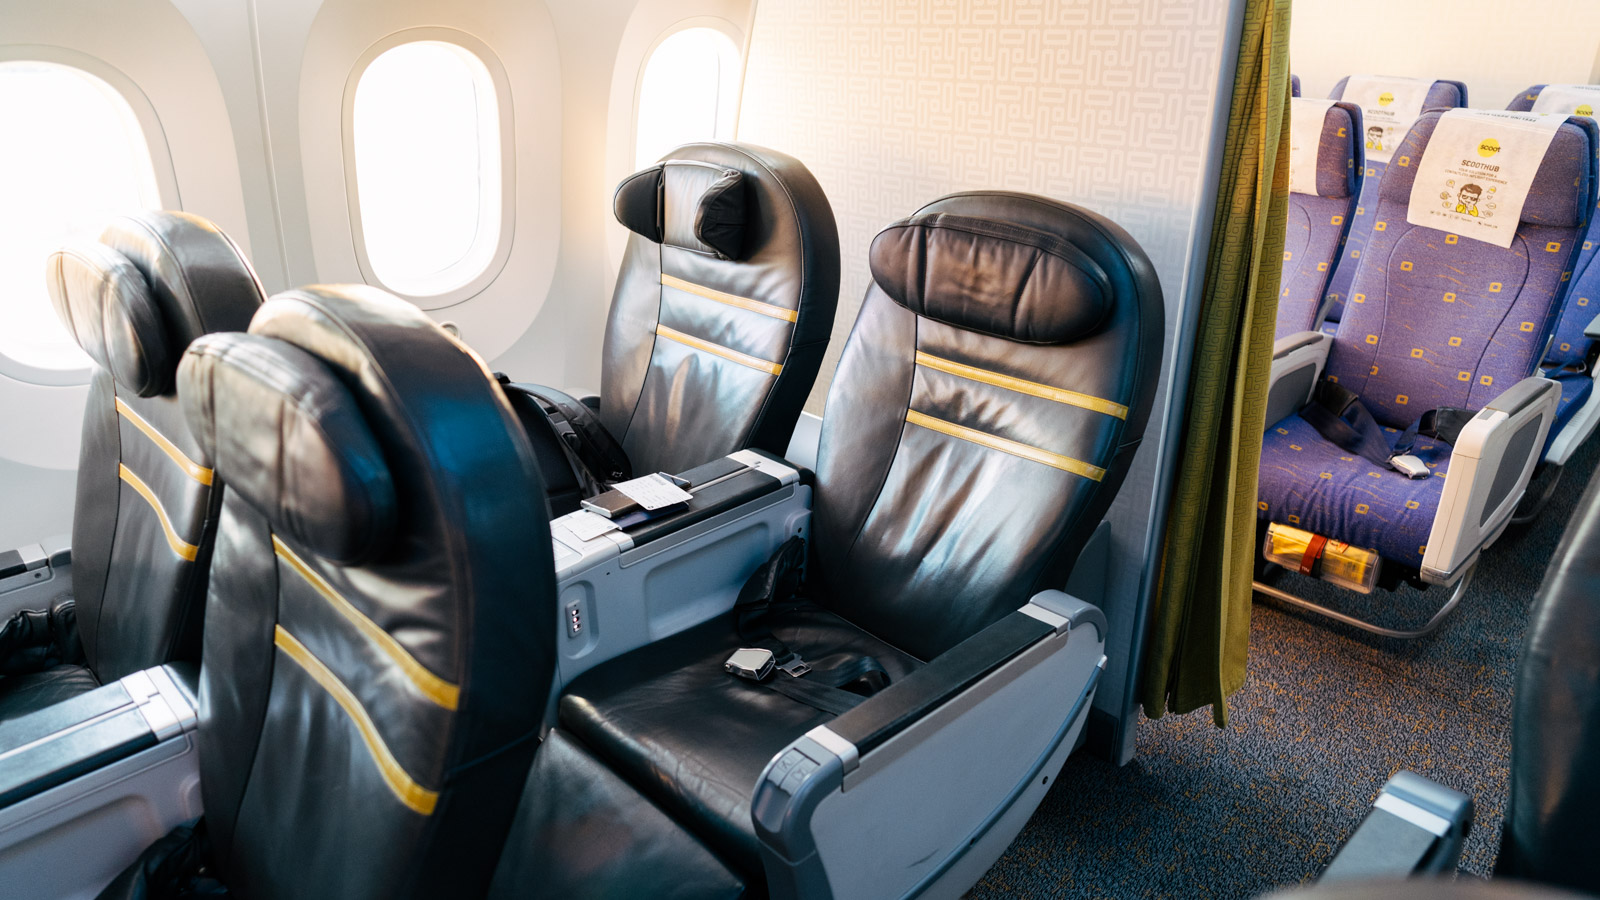 Scoot surprises on long-haul: a review of Scoot's 787 Economy